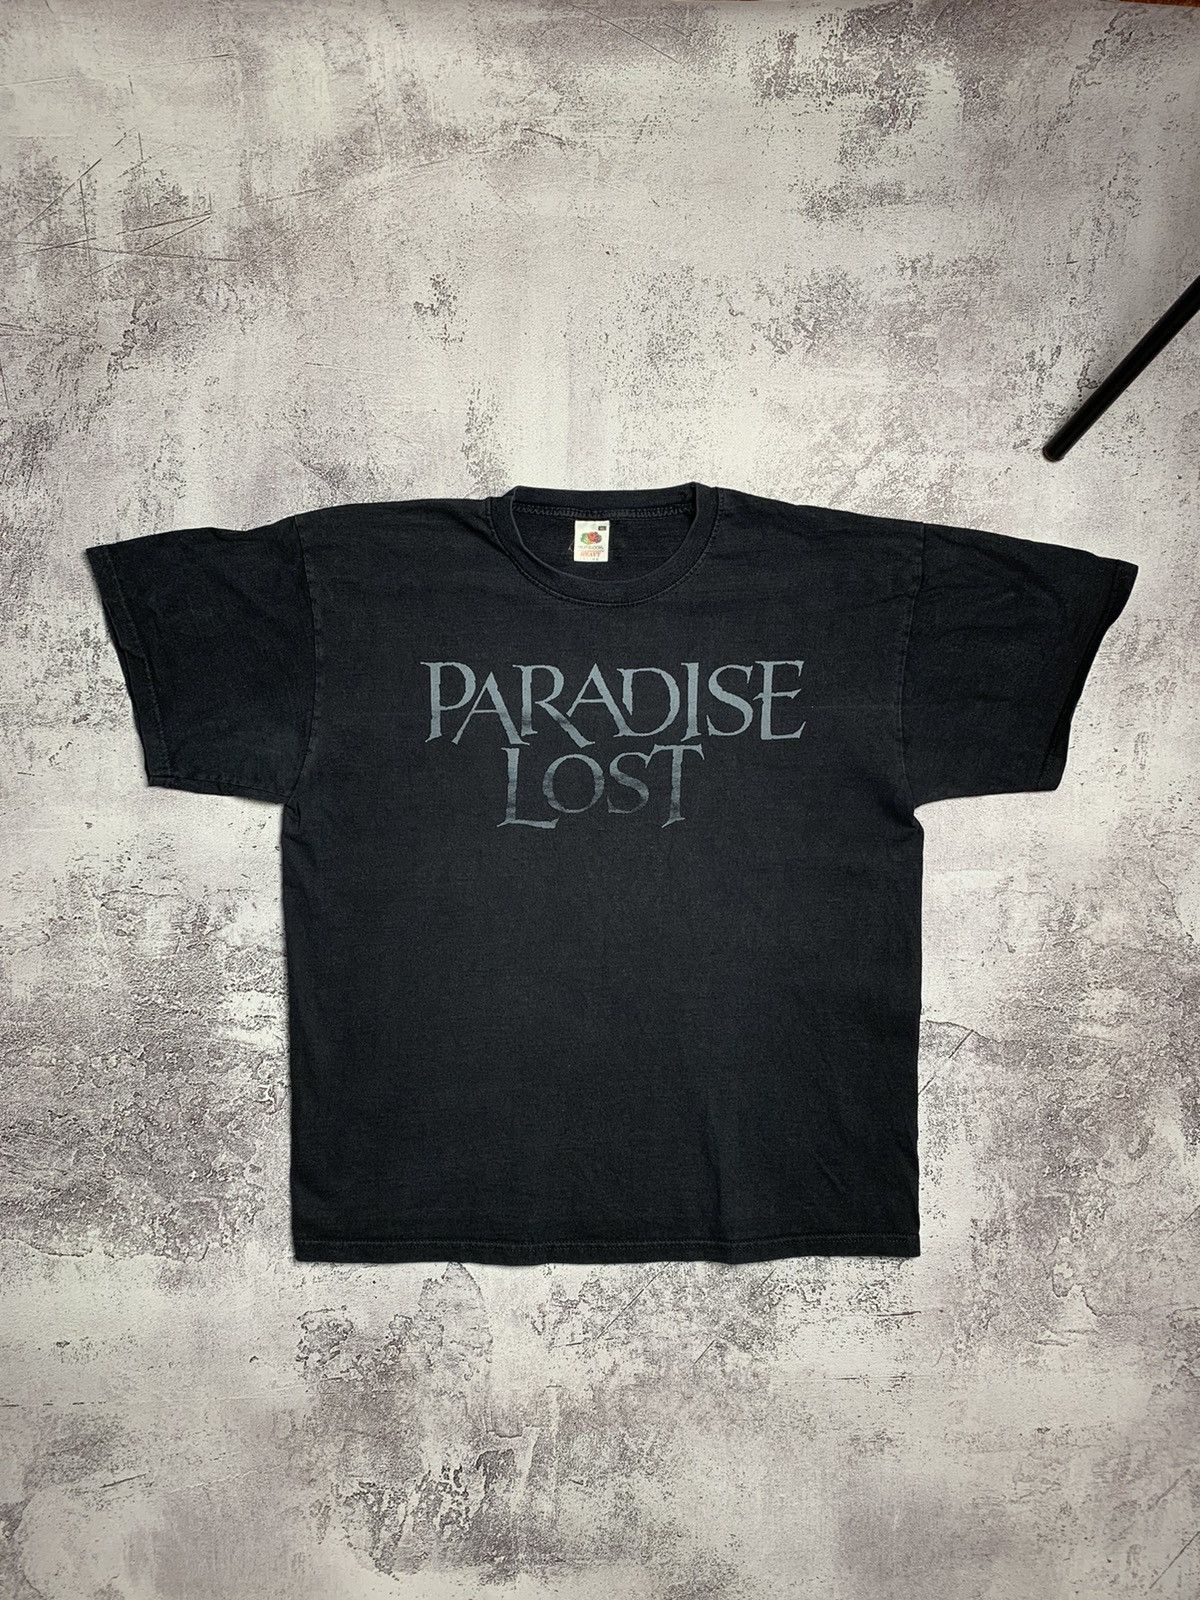 Pre-owned Band Tees X Rock T Shirt Vintage Paradise Lost Gothic Metal Black Tee